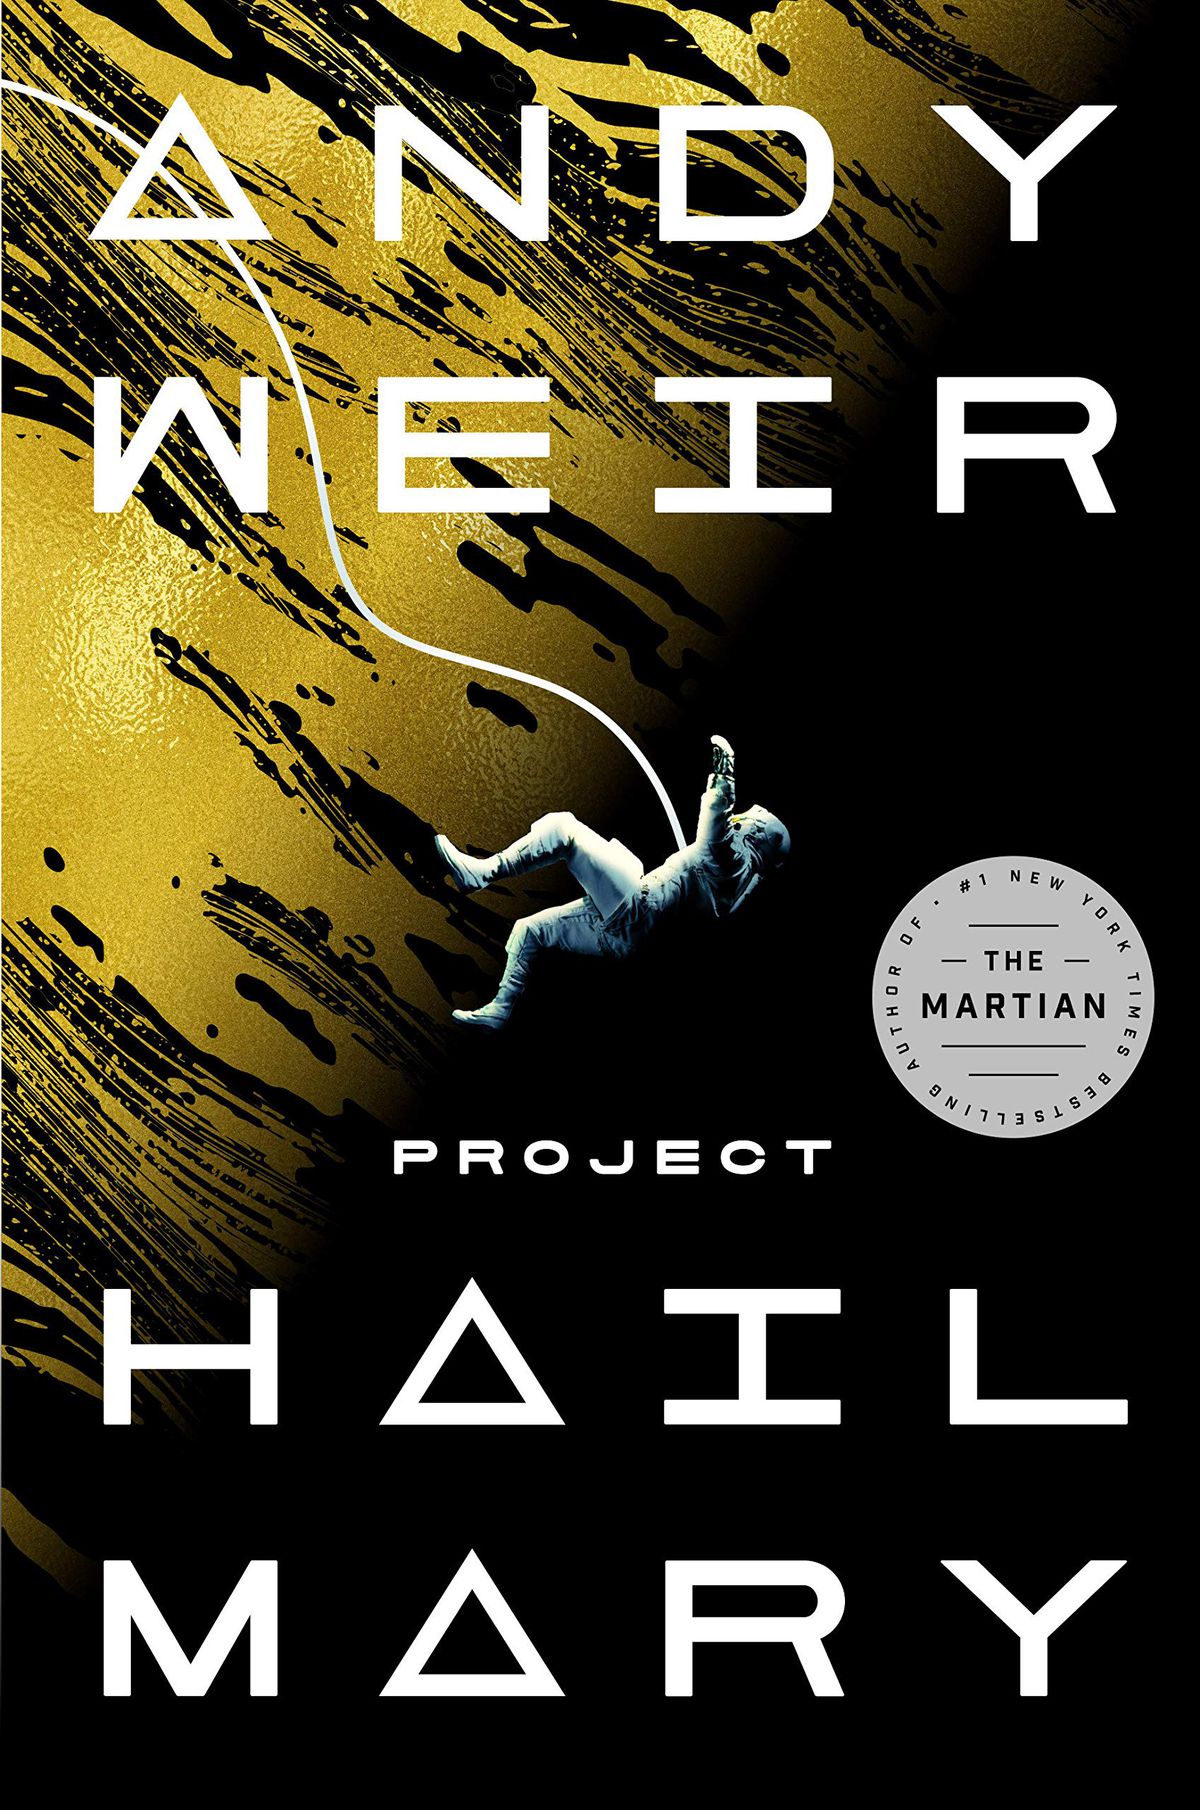 The cover for “Project Hail Mary” by Andy Weir showing an astronaut floating in space, held by just one tether